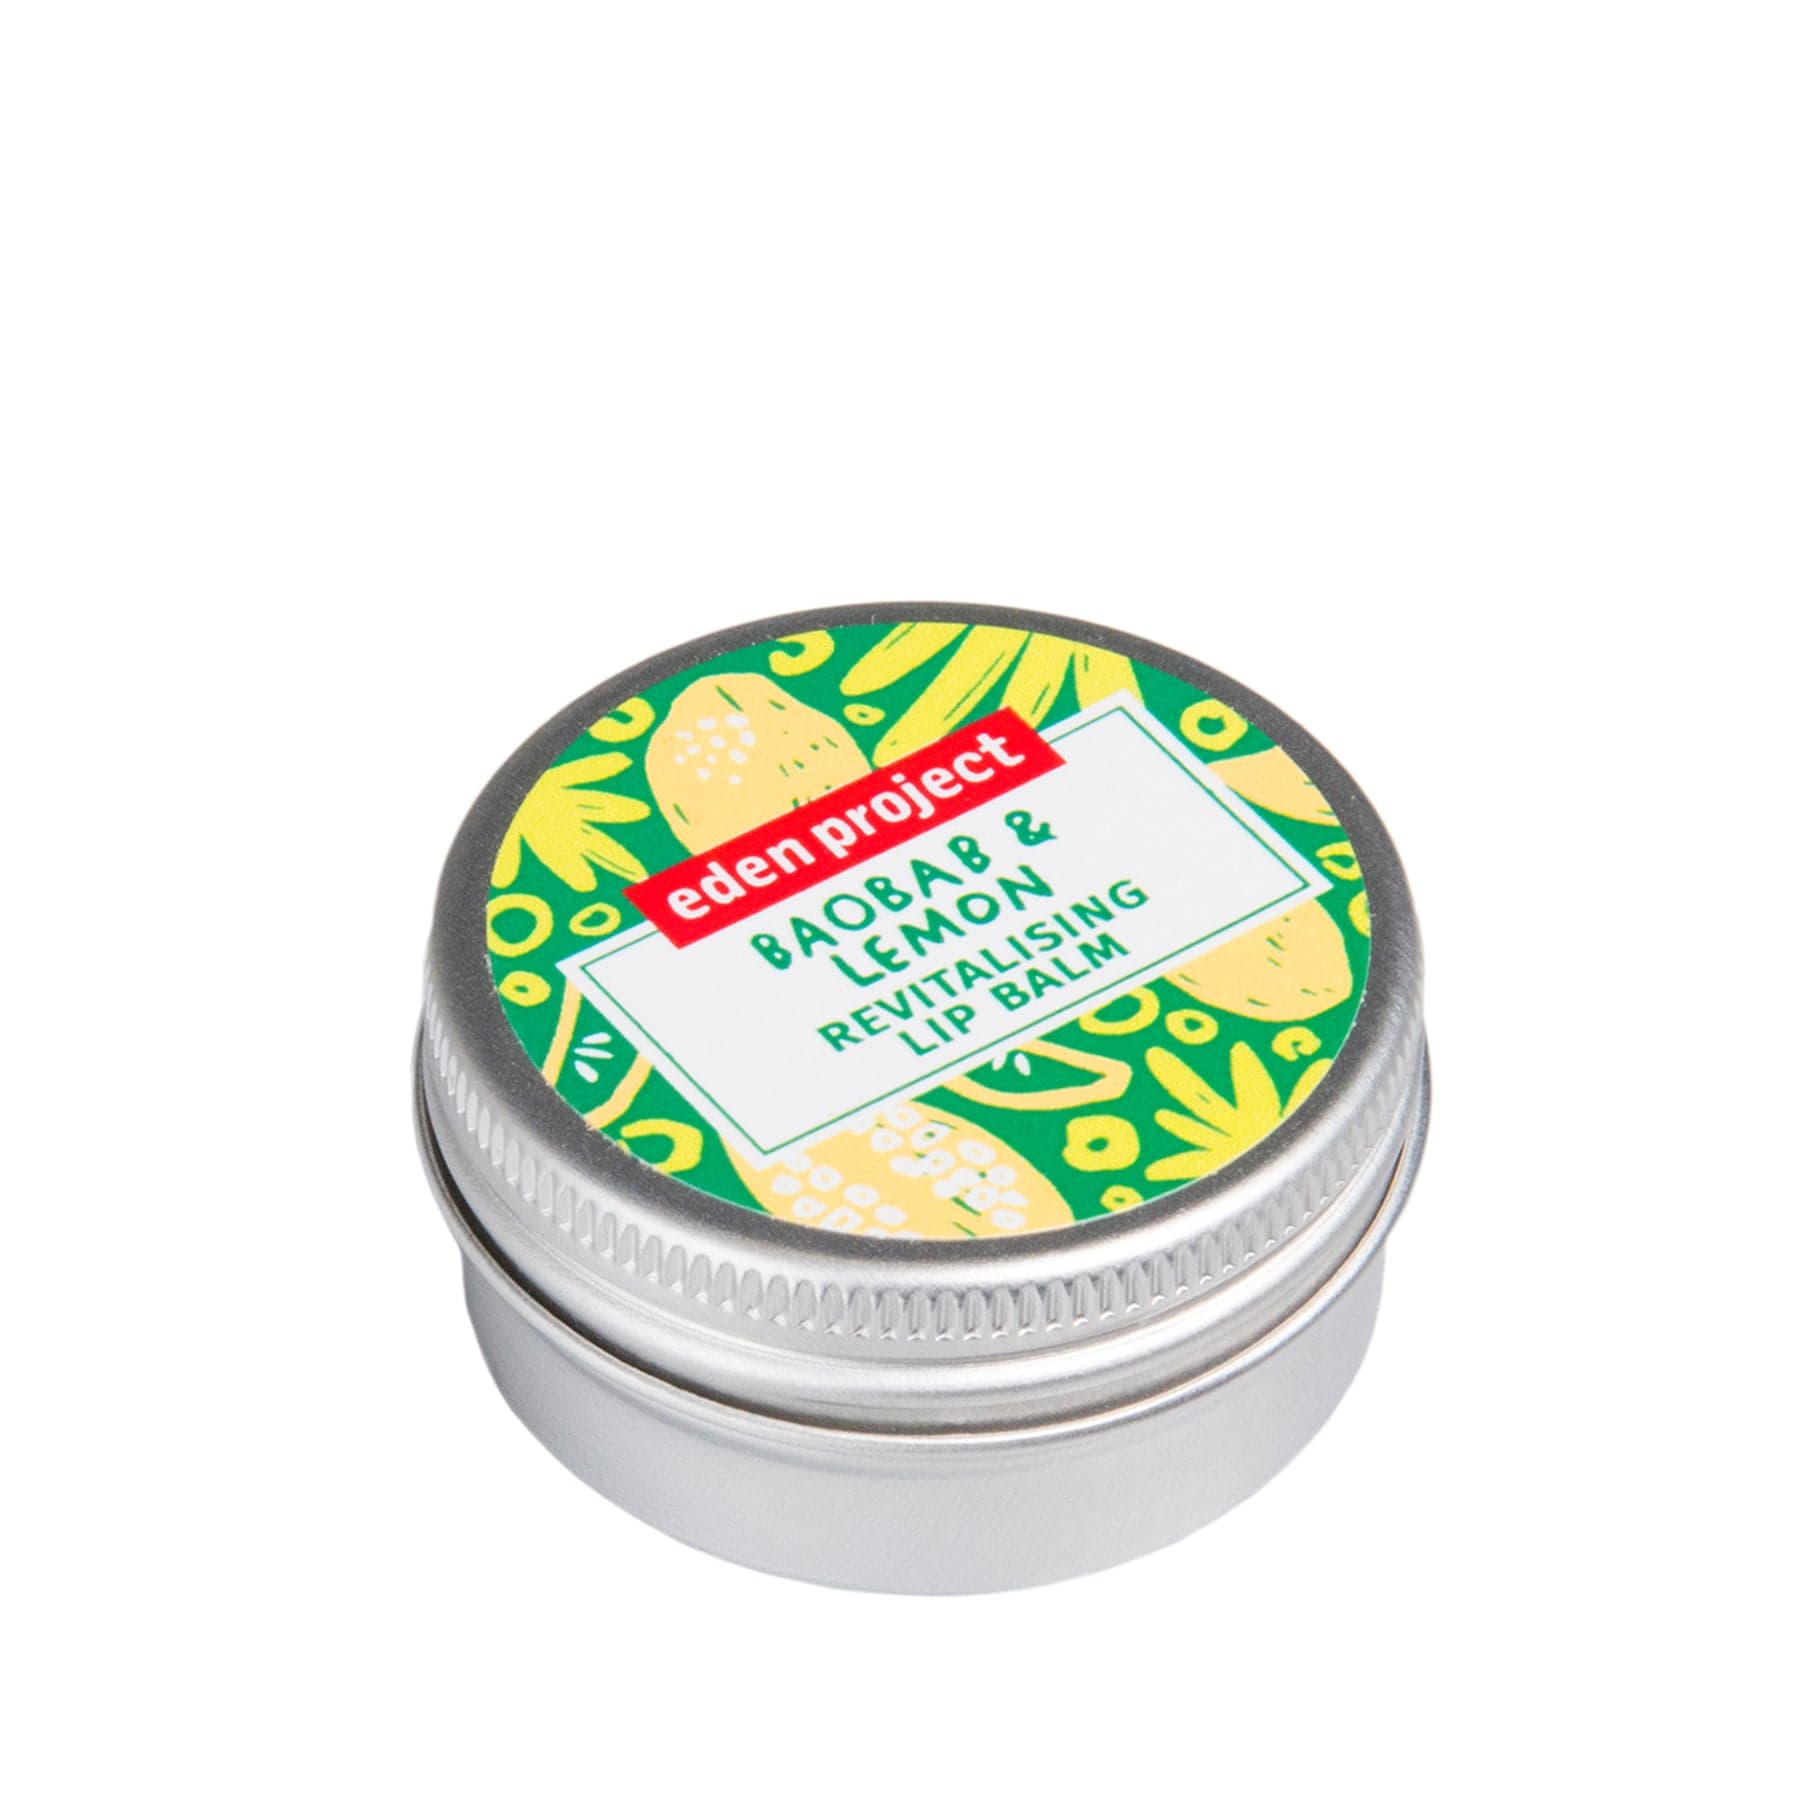 Baobab and Lemon Revitalising Lip Balm in metal tin from the Eden Project, isolated on white background.